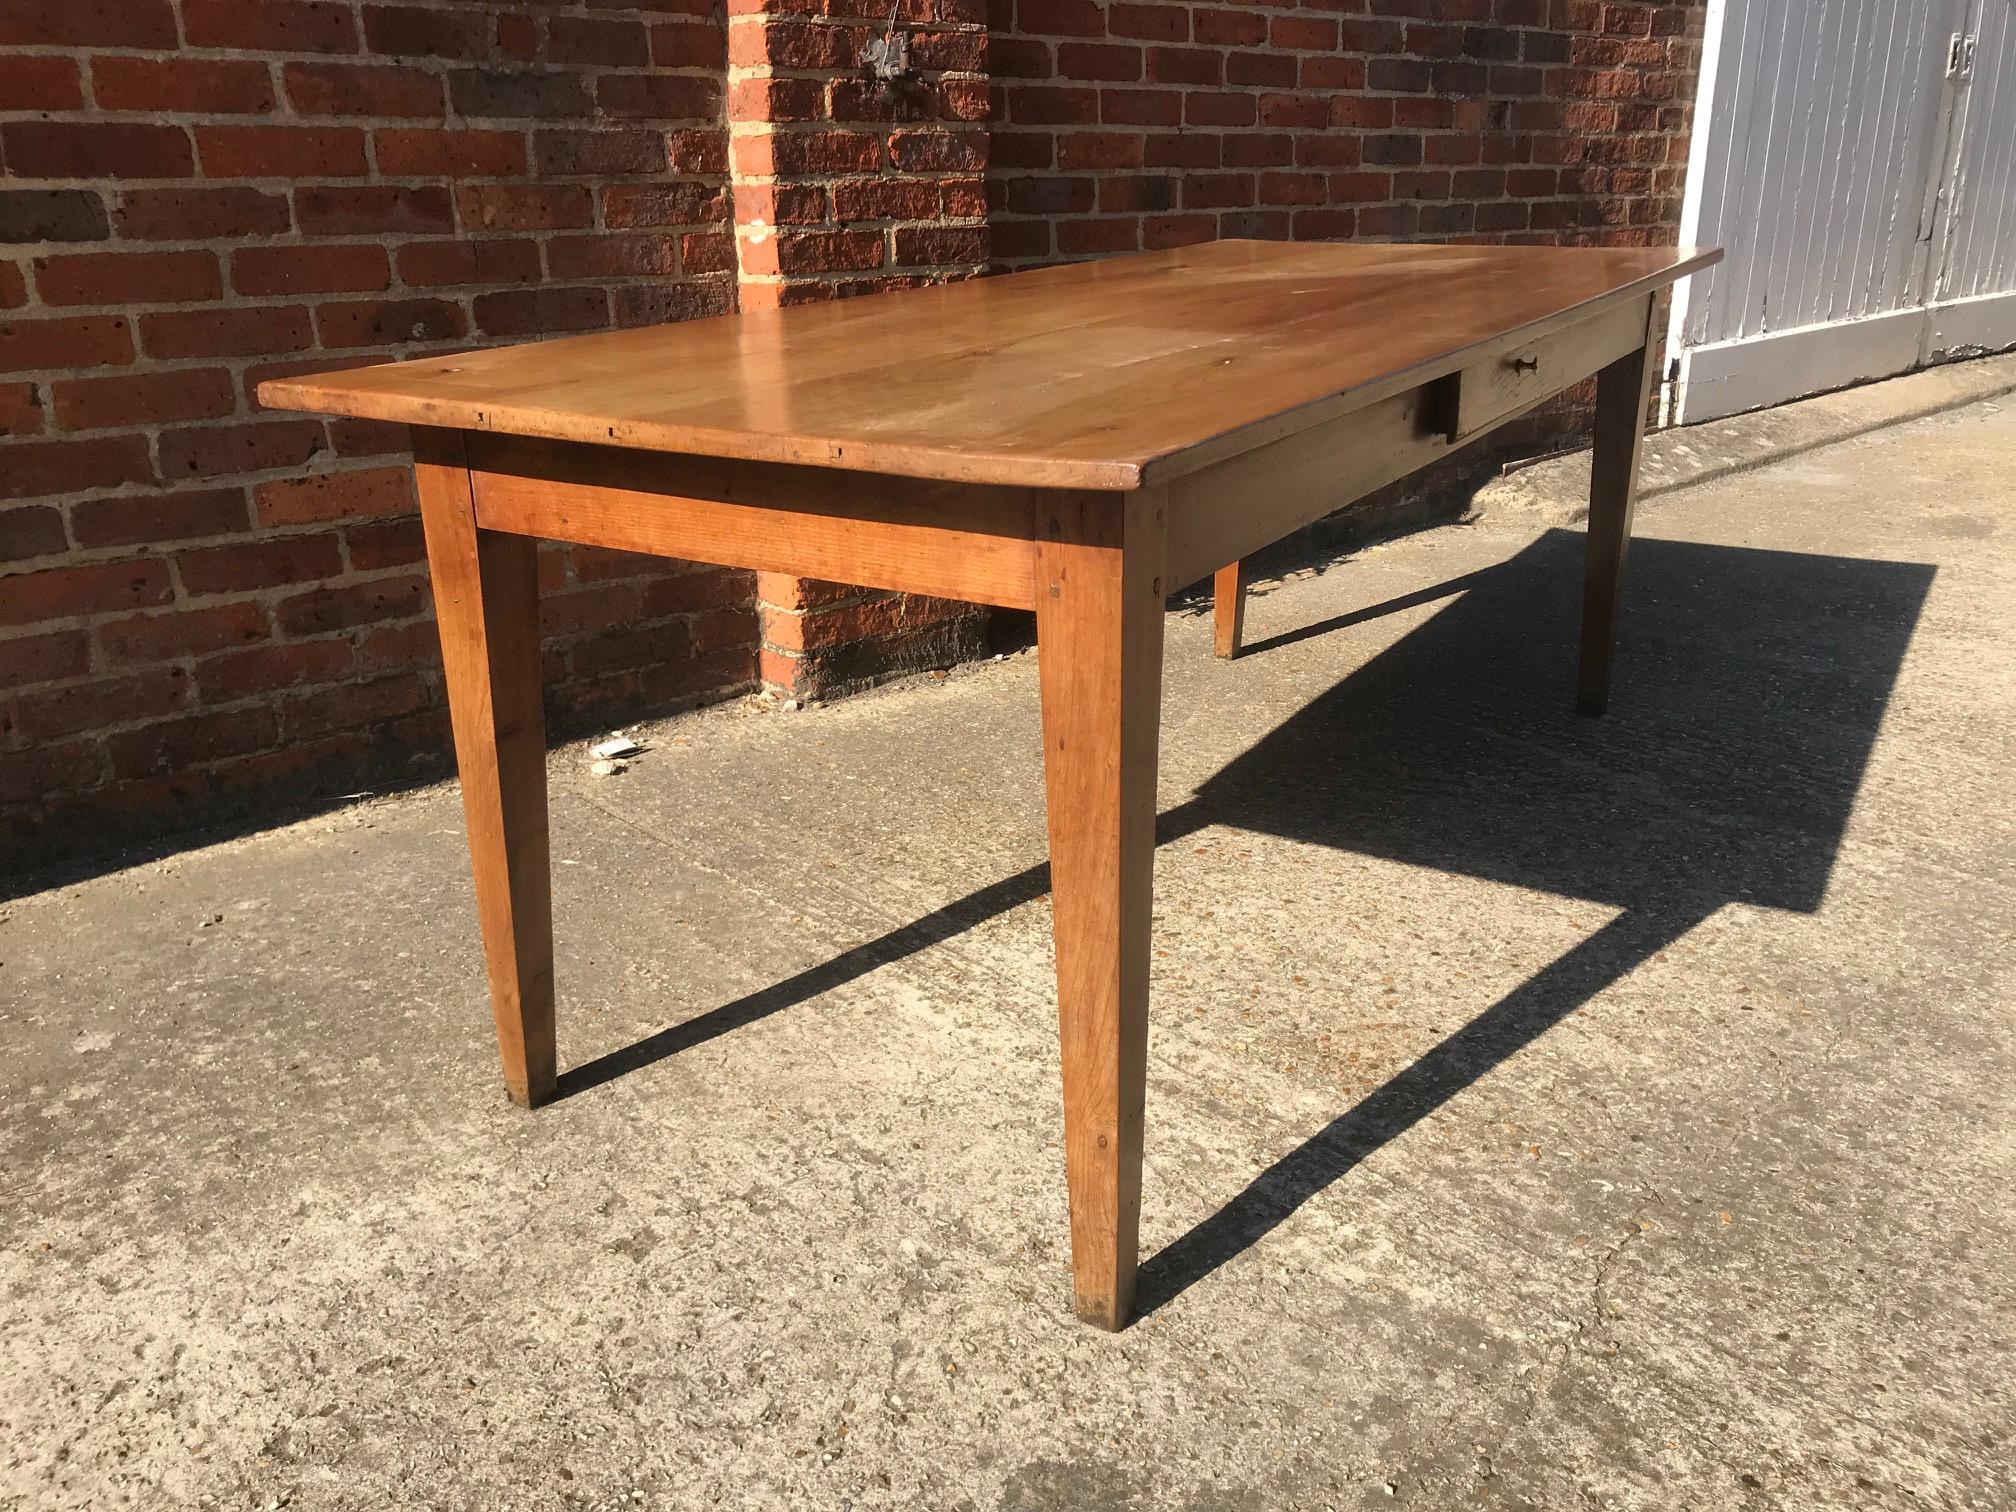 French Provincial Cherry Tapered leg Antique Dining Table